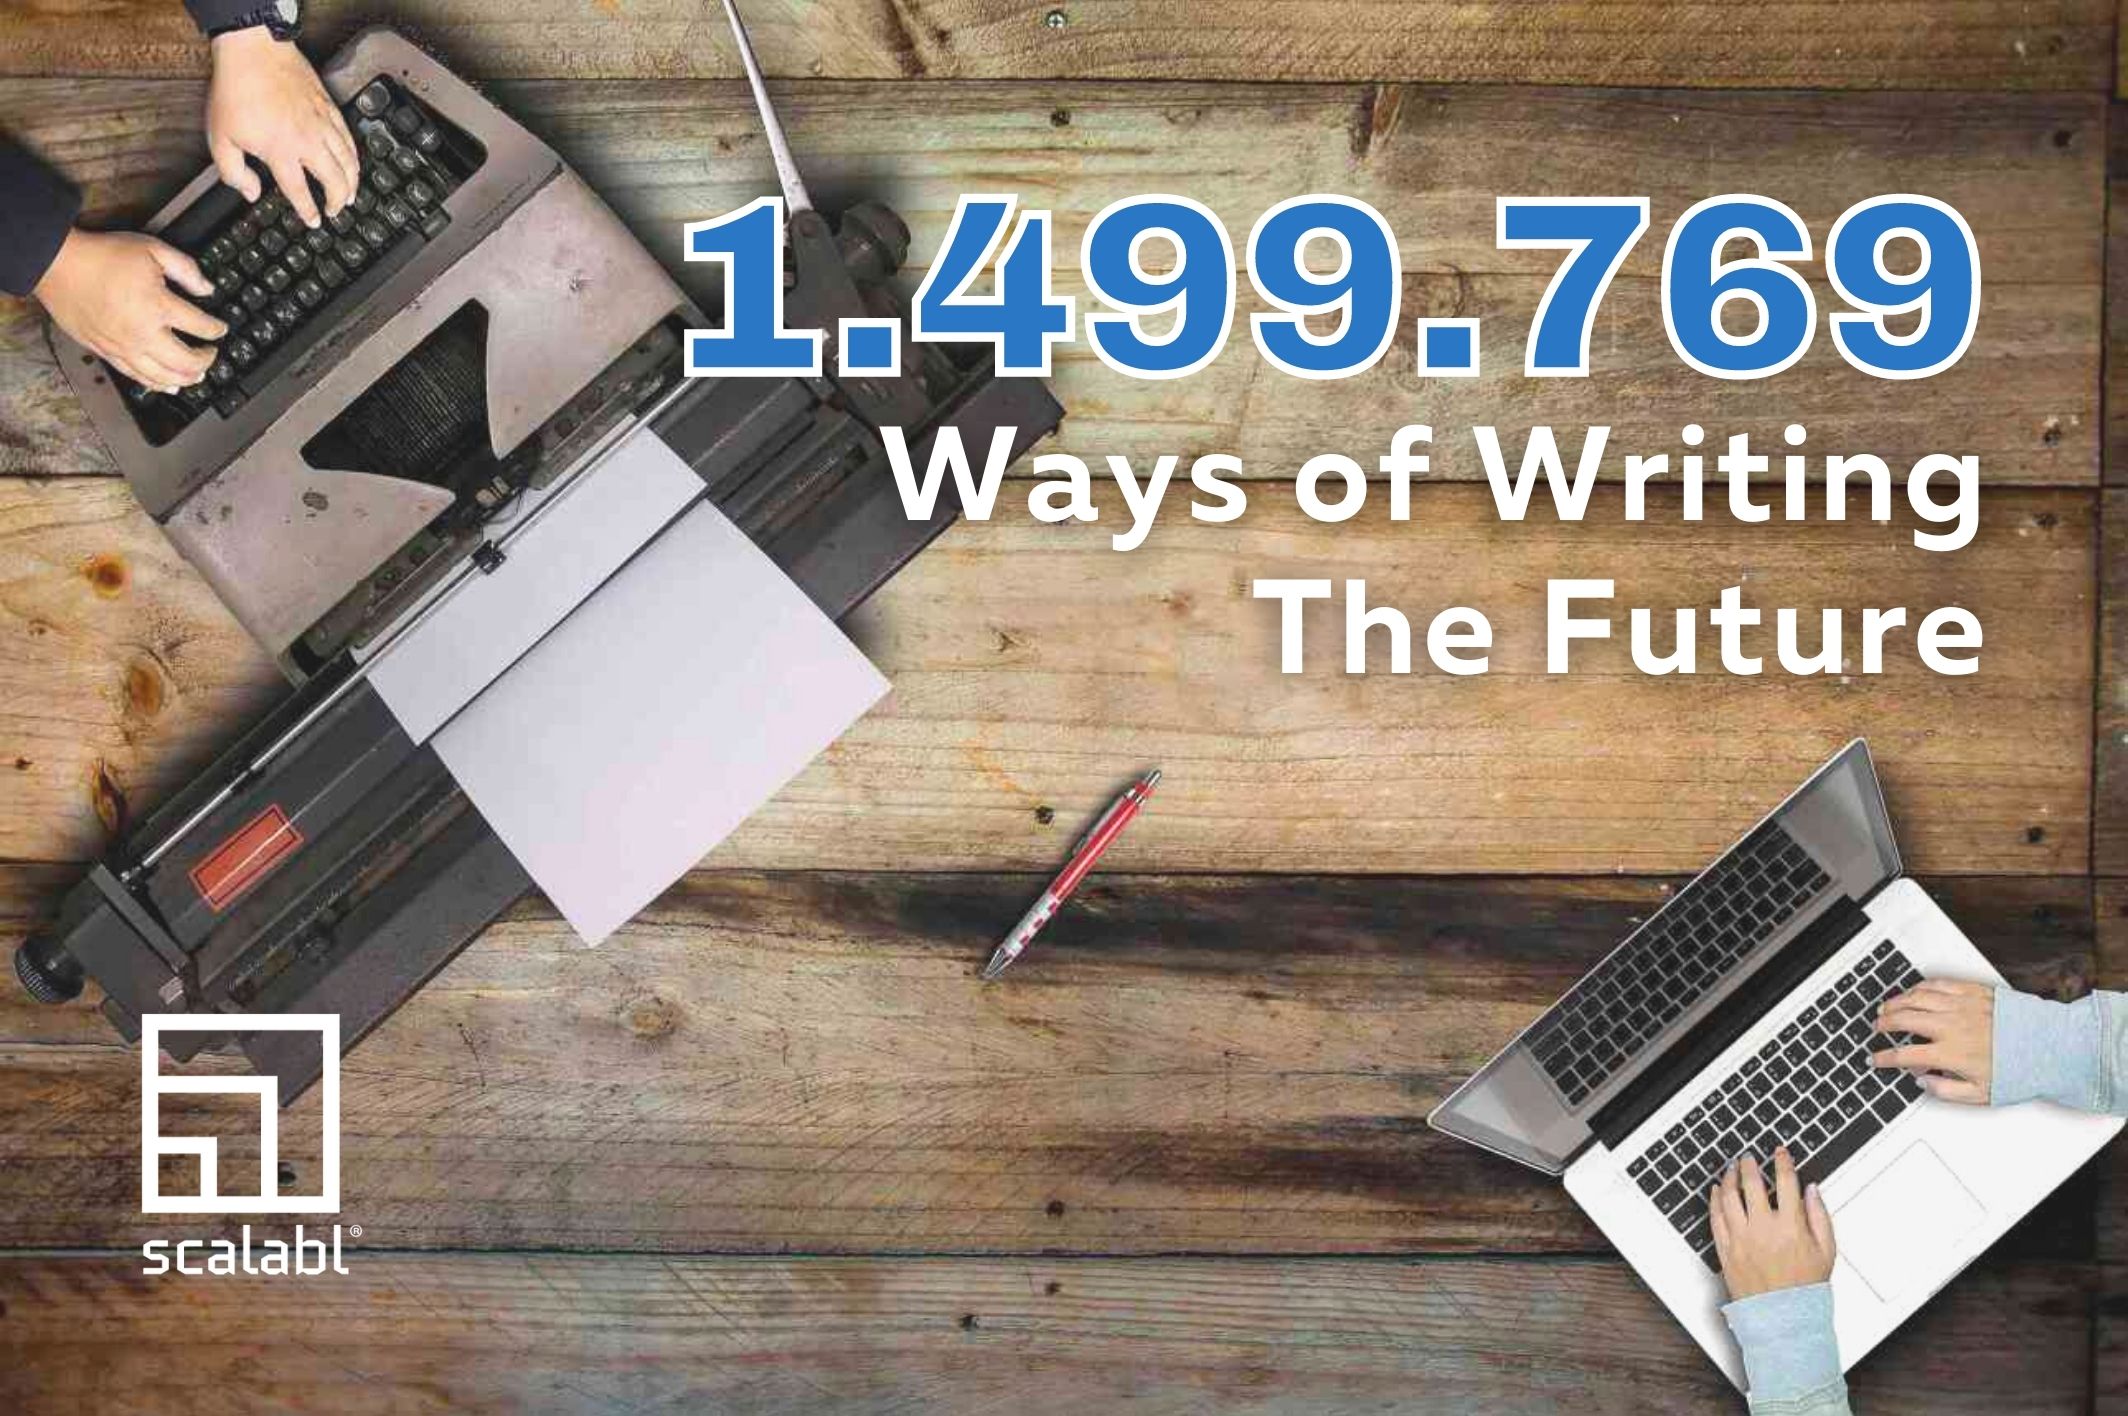 1,499,769 Ways of Writing the Future